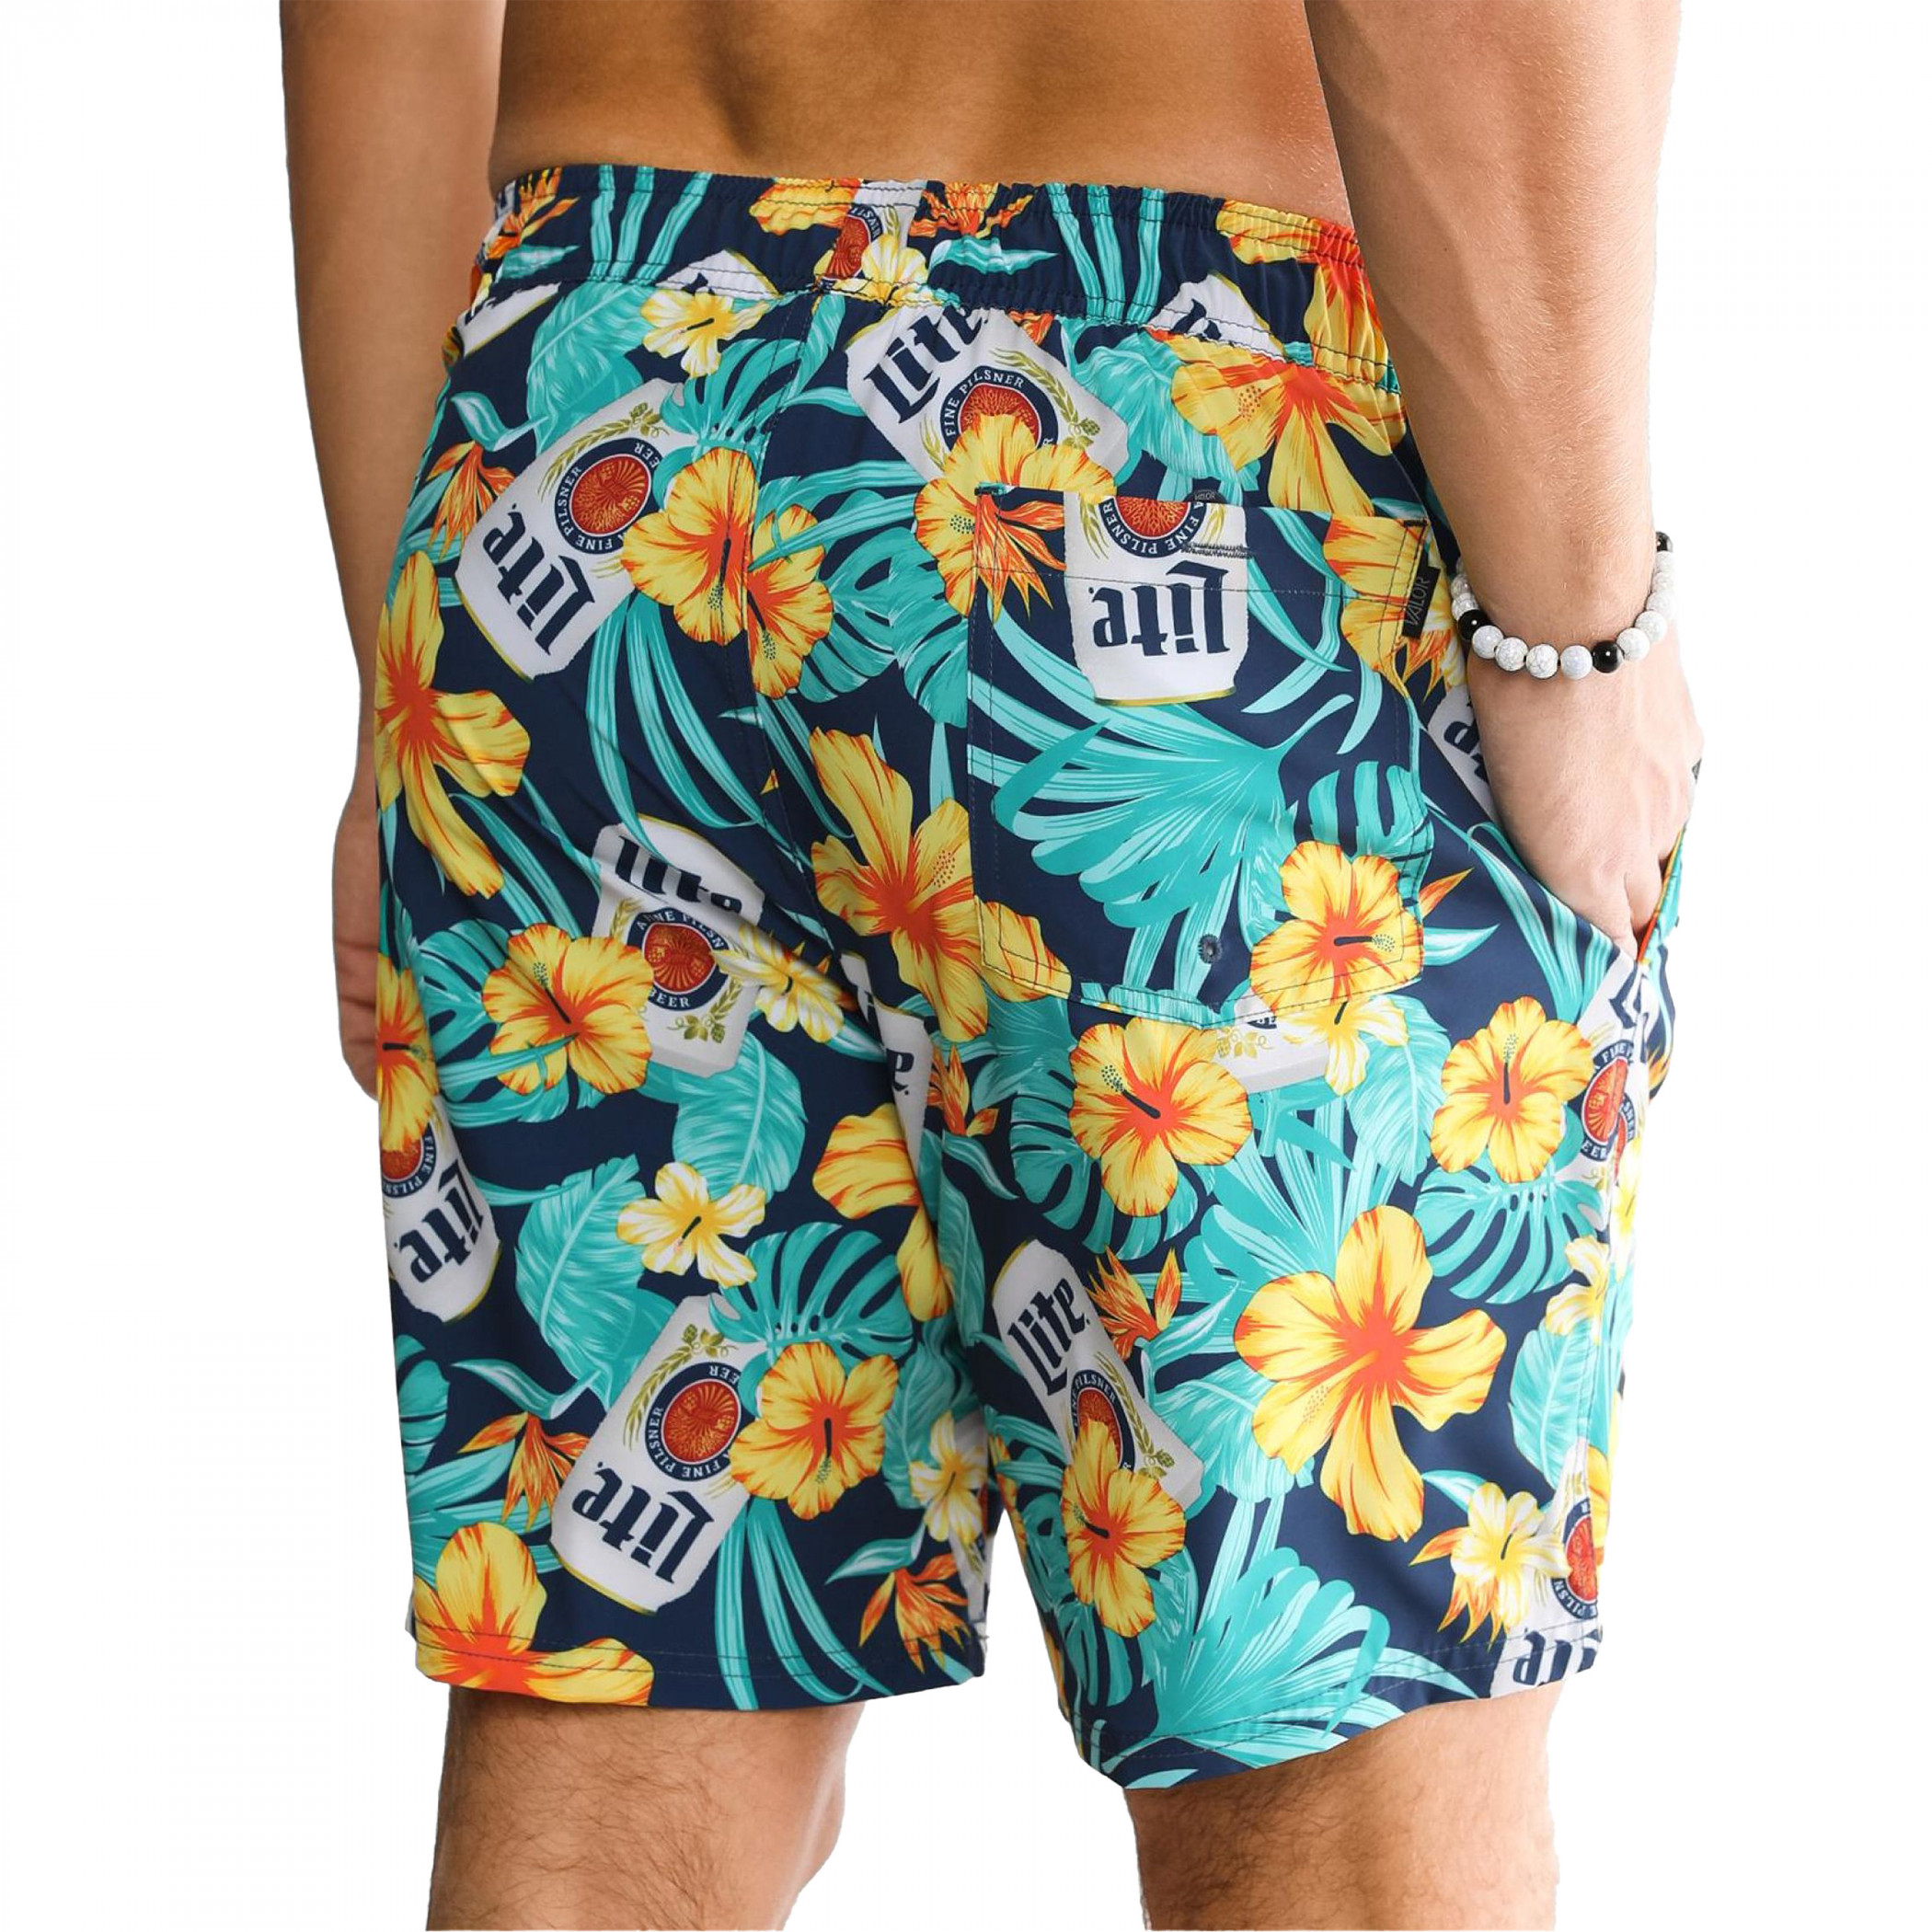 Miller Lite Tropical Cans All Over Print Board Shorts